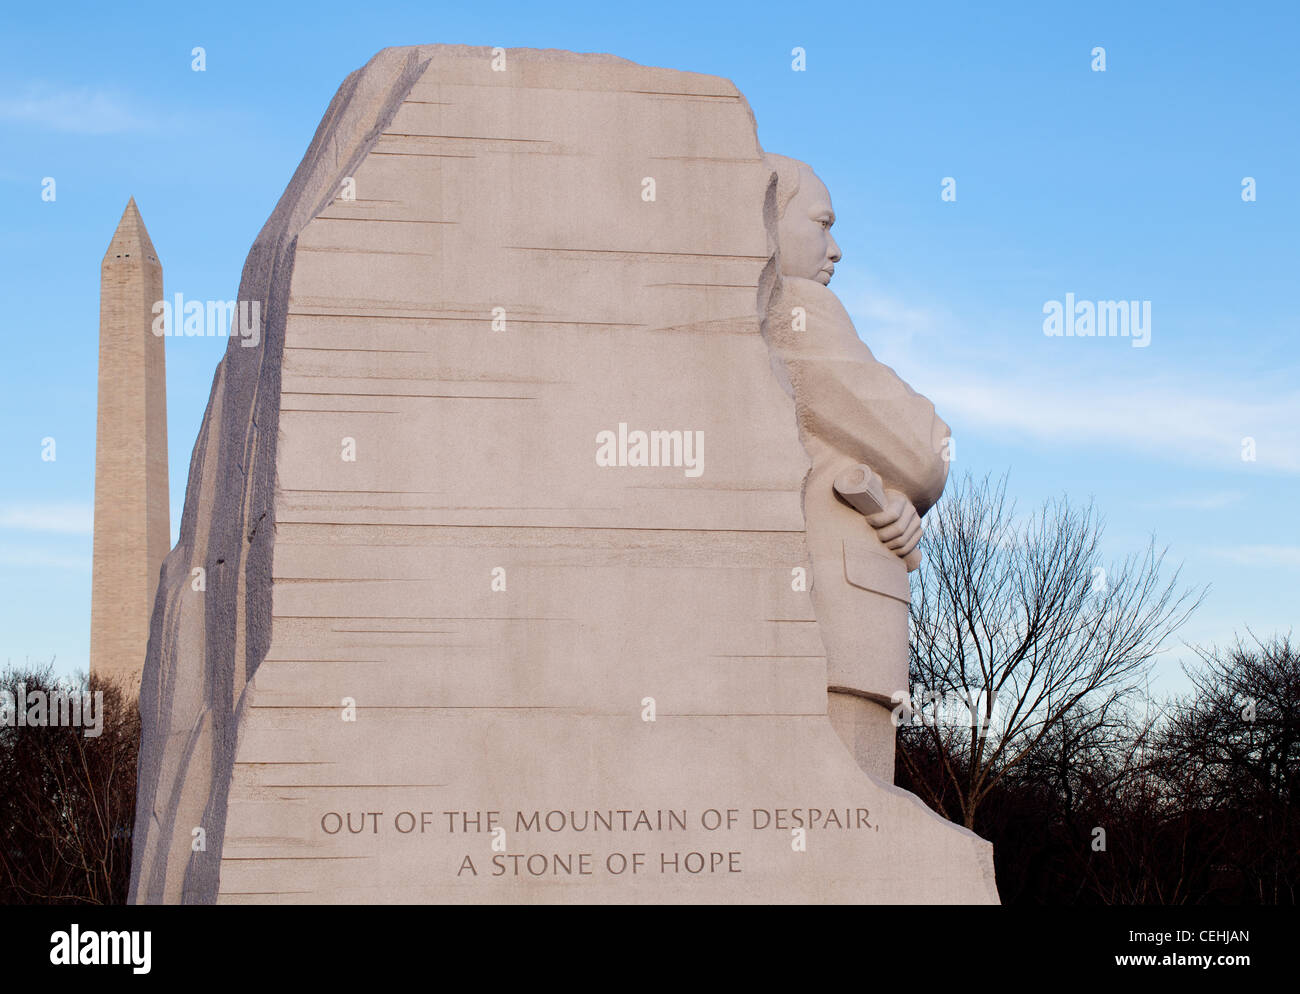 Washington, DC - February 13: Monument to Dr Martin Luther King on February 13, 2012. Government agreed on Feb 12 to change the Drum Major words on the statue Stock Photo